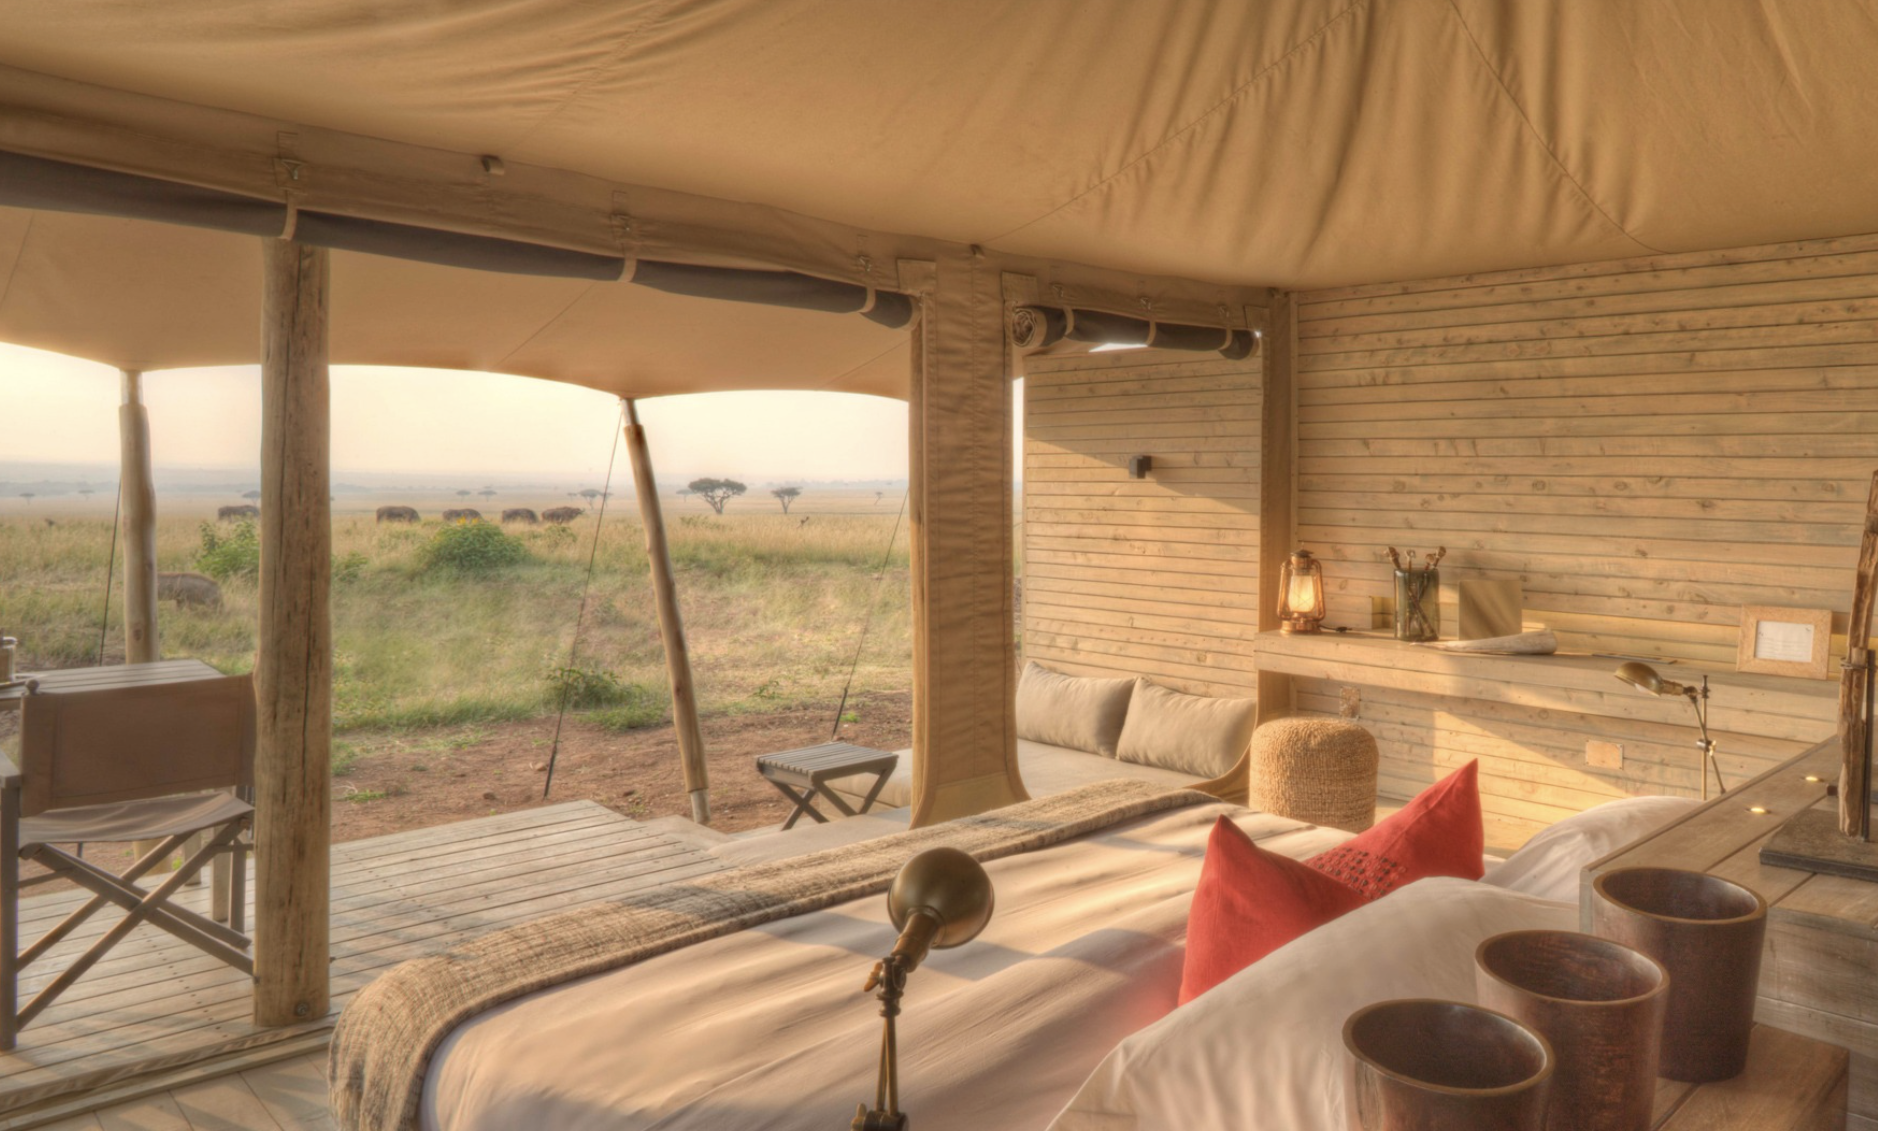 Tented accommodations at andBeyond Kichwa Tembo Tented Camp in Kenya, Africa